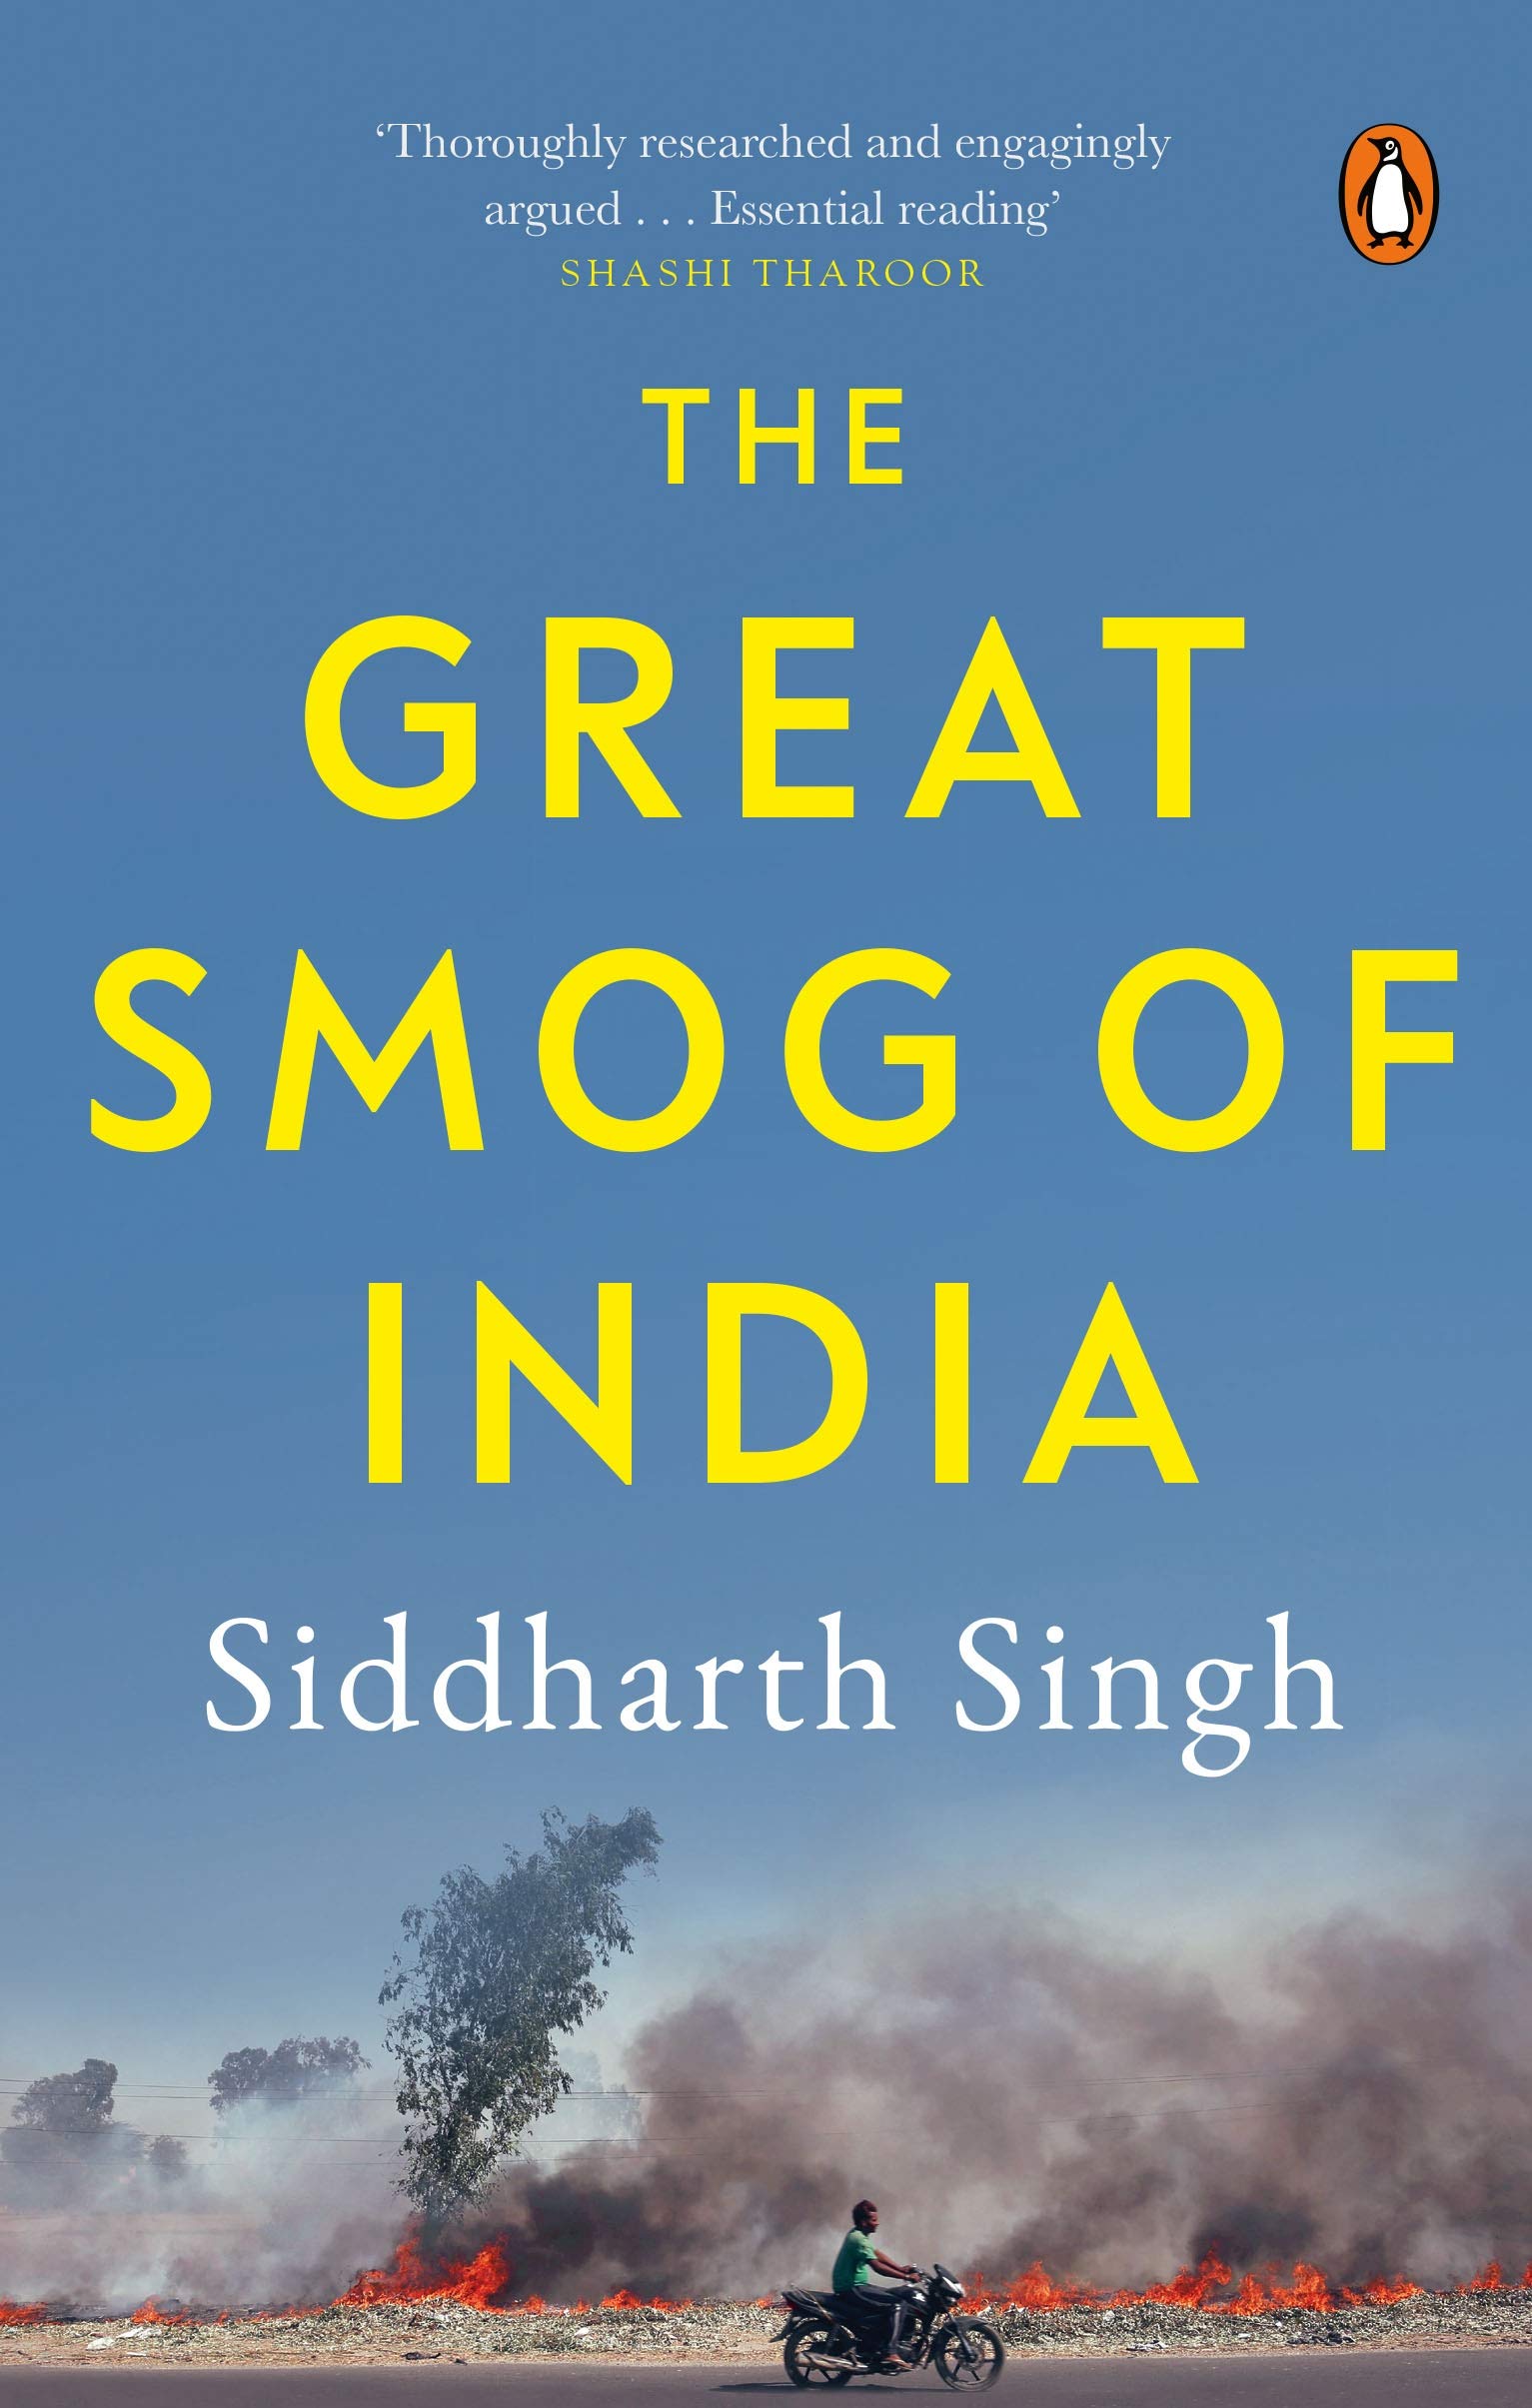 The Great Smog of India